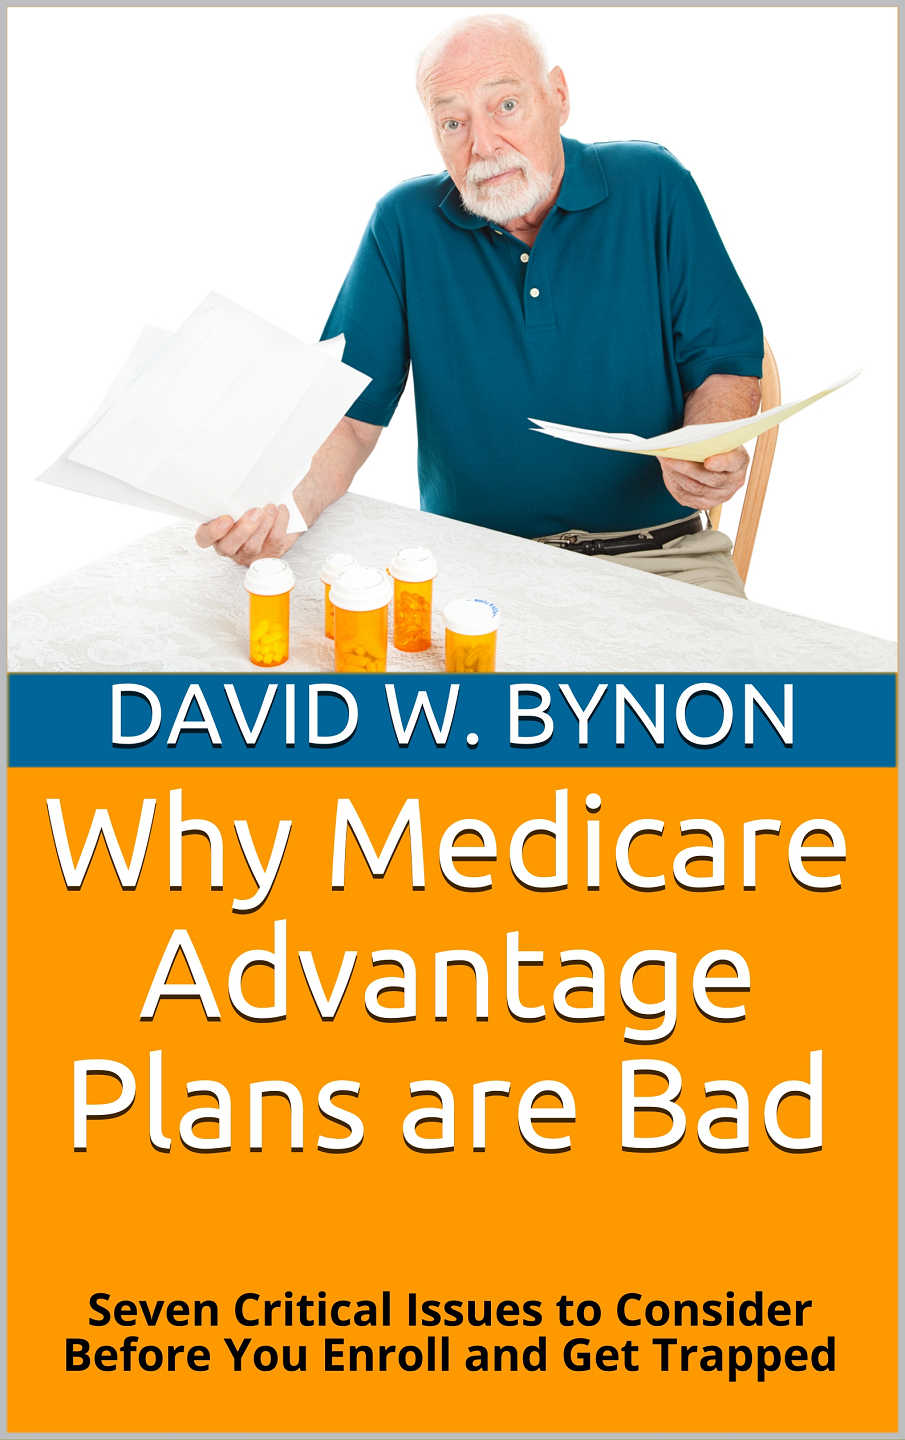 Are Medicare Advantage Plans Bad? This Fresh, New Book Tells All.